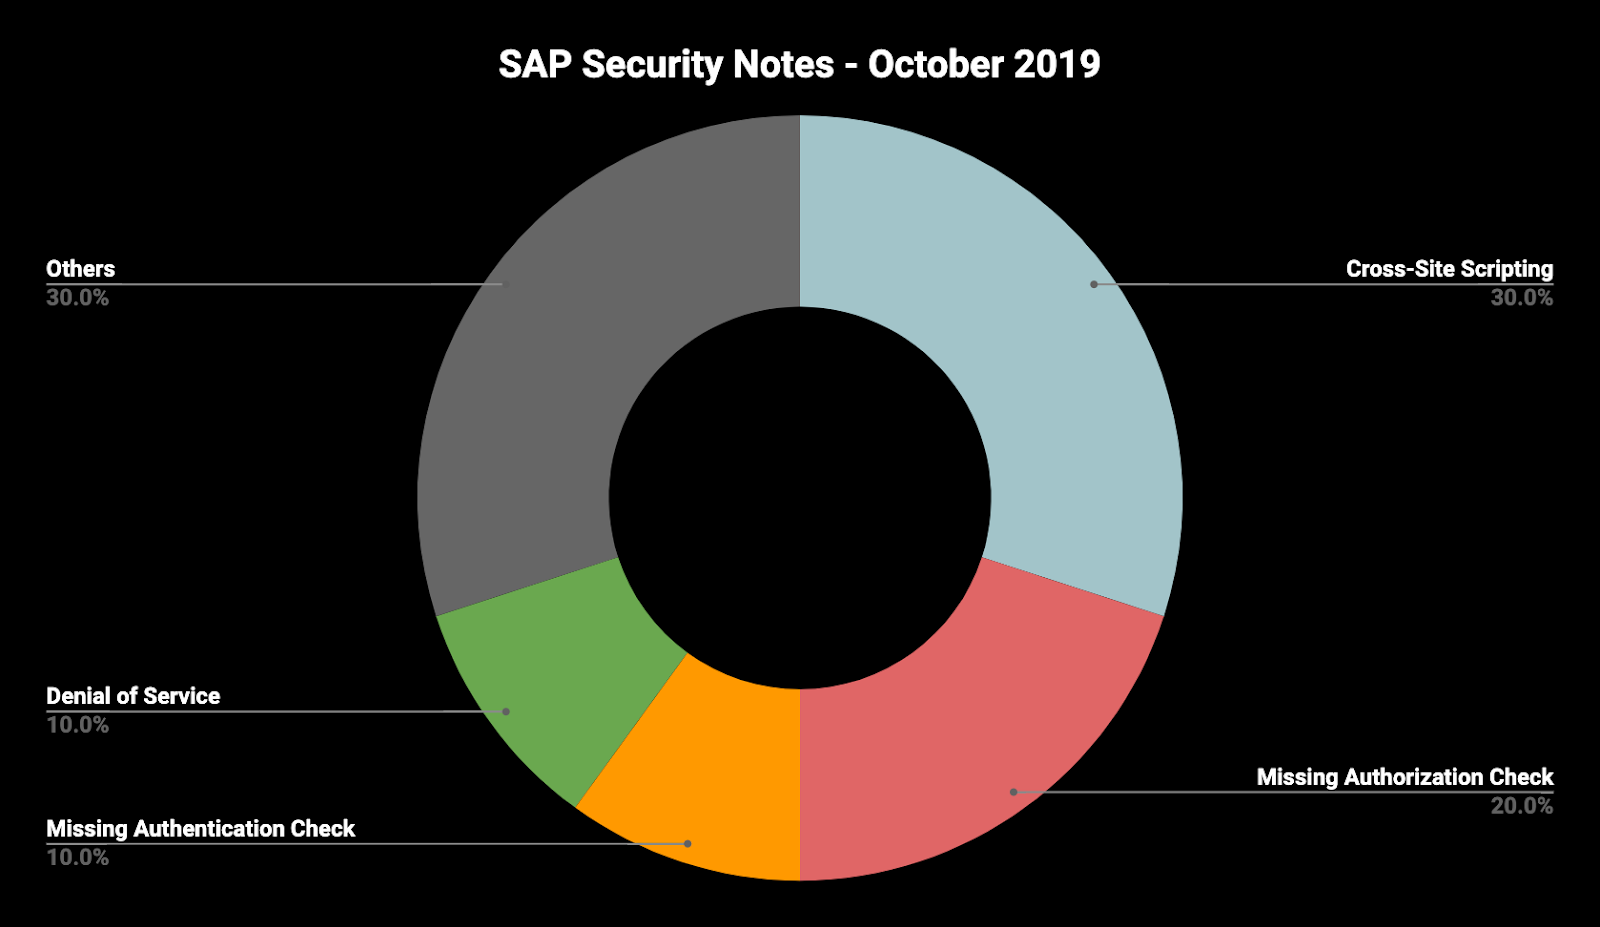 SAP Security Notes October '19: Only Nine New Notes, but Two HotNews 